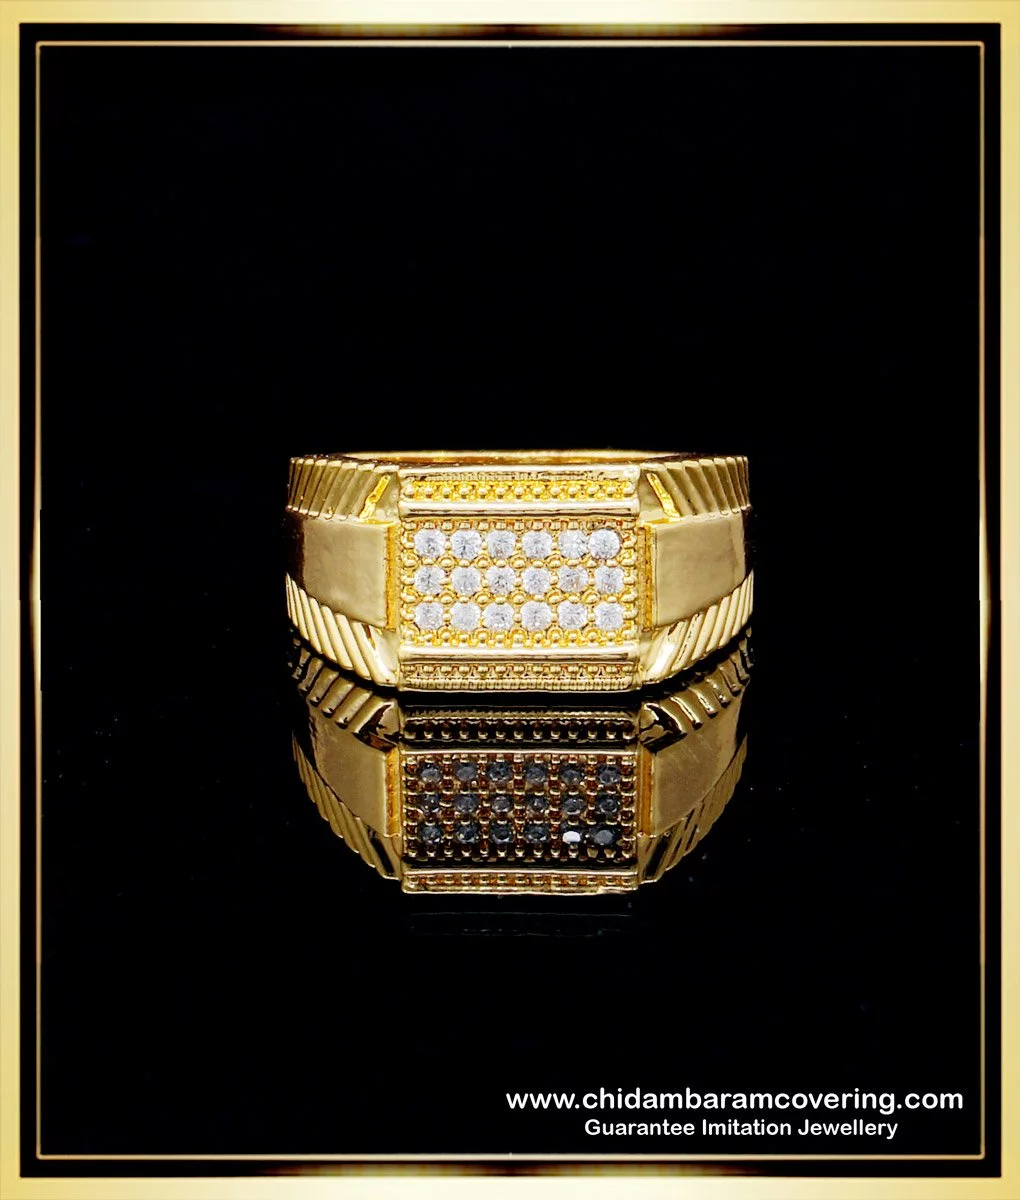 Buy quality jewelry for Men online in Ahmedabad.